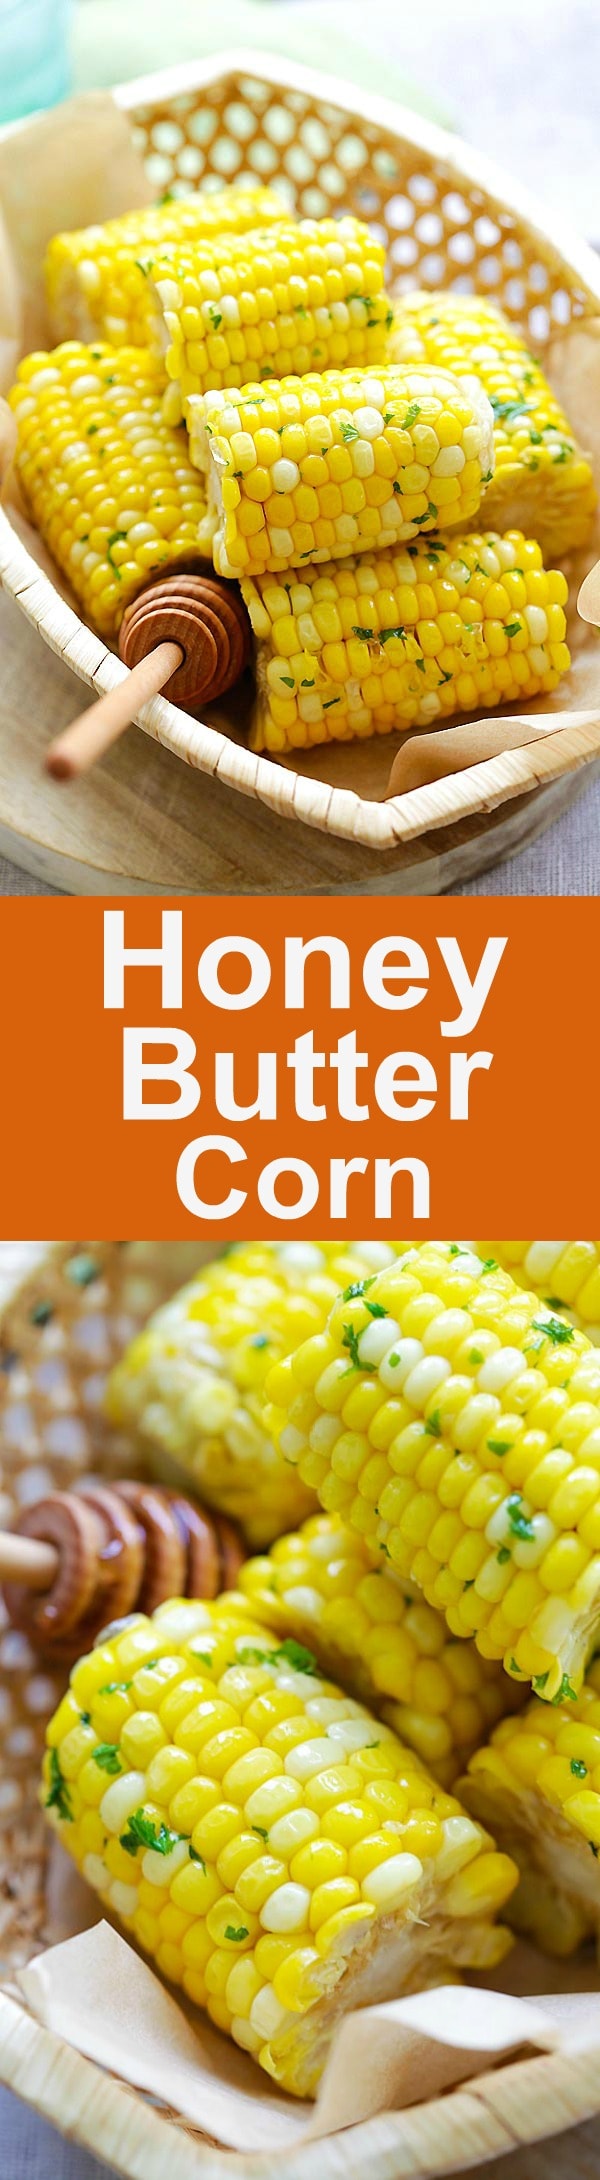 Honey Butter Corn - juicy and sweet corns with sticky sweet and buttery honey butter. Quick and easy recipe that takes only 12 mins | rasamalaysia.com